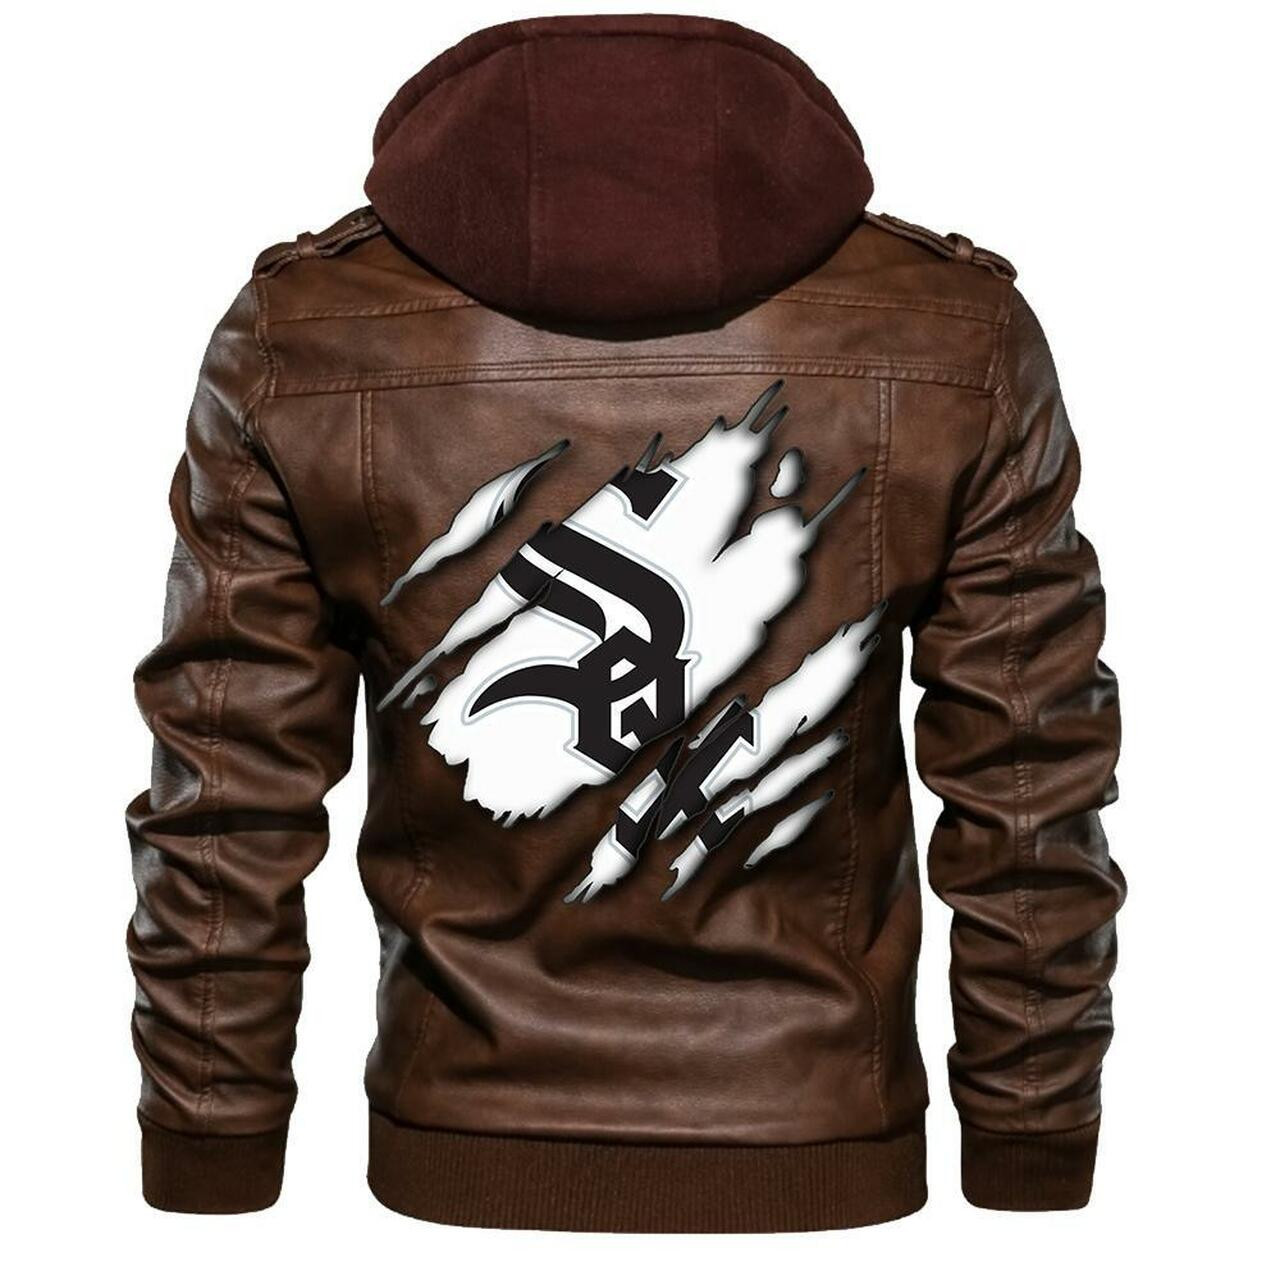 You'll get the best Leather Jacket by shopping online 99